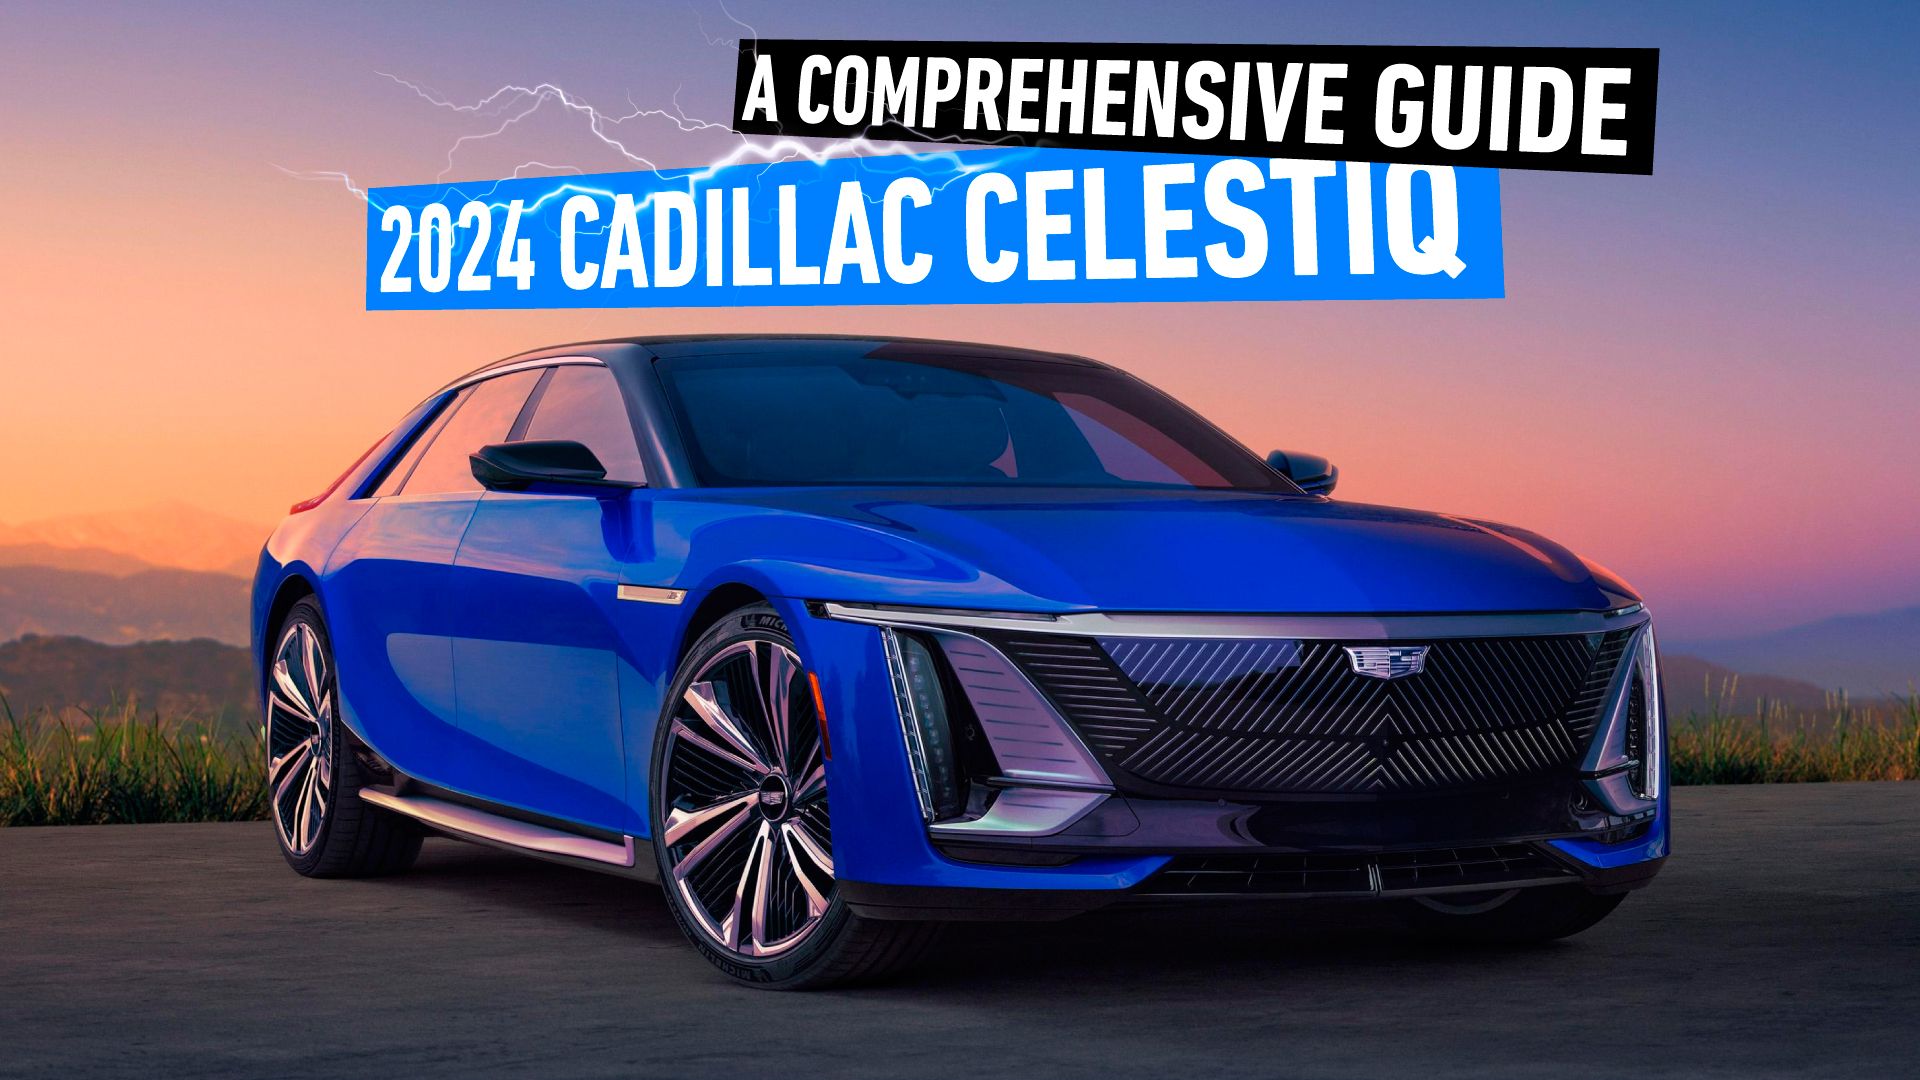 2024 Cadillac Celestiq: A Comprehensive Guide On Features, Specs, And Pricing